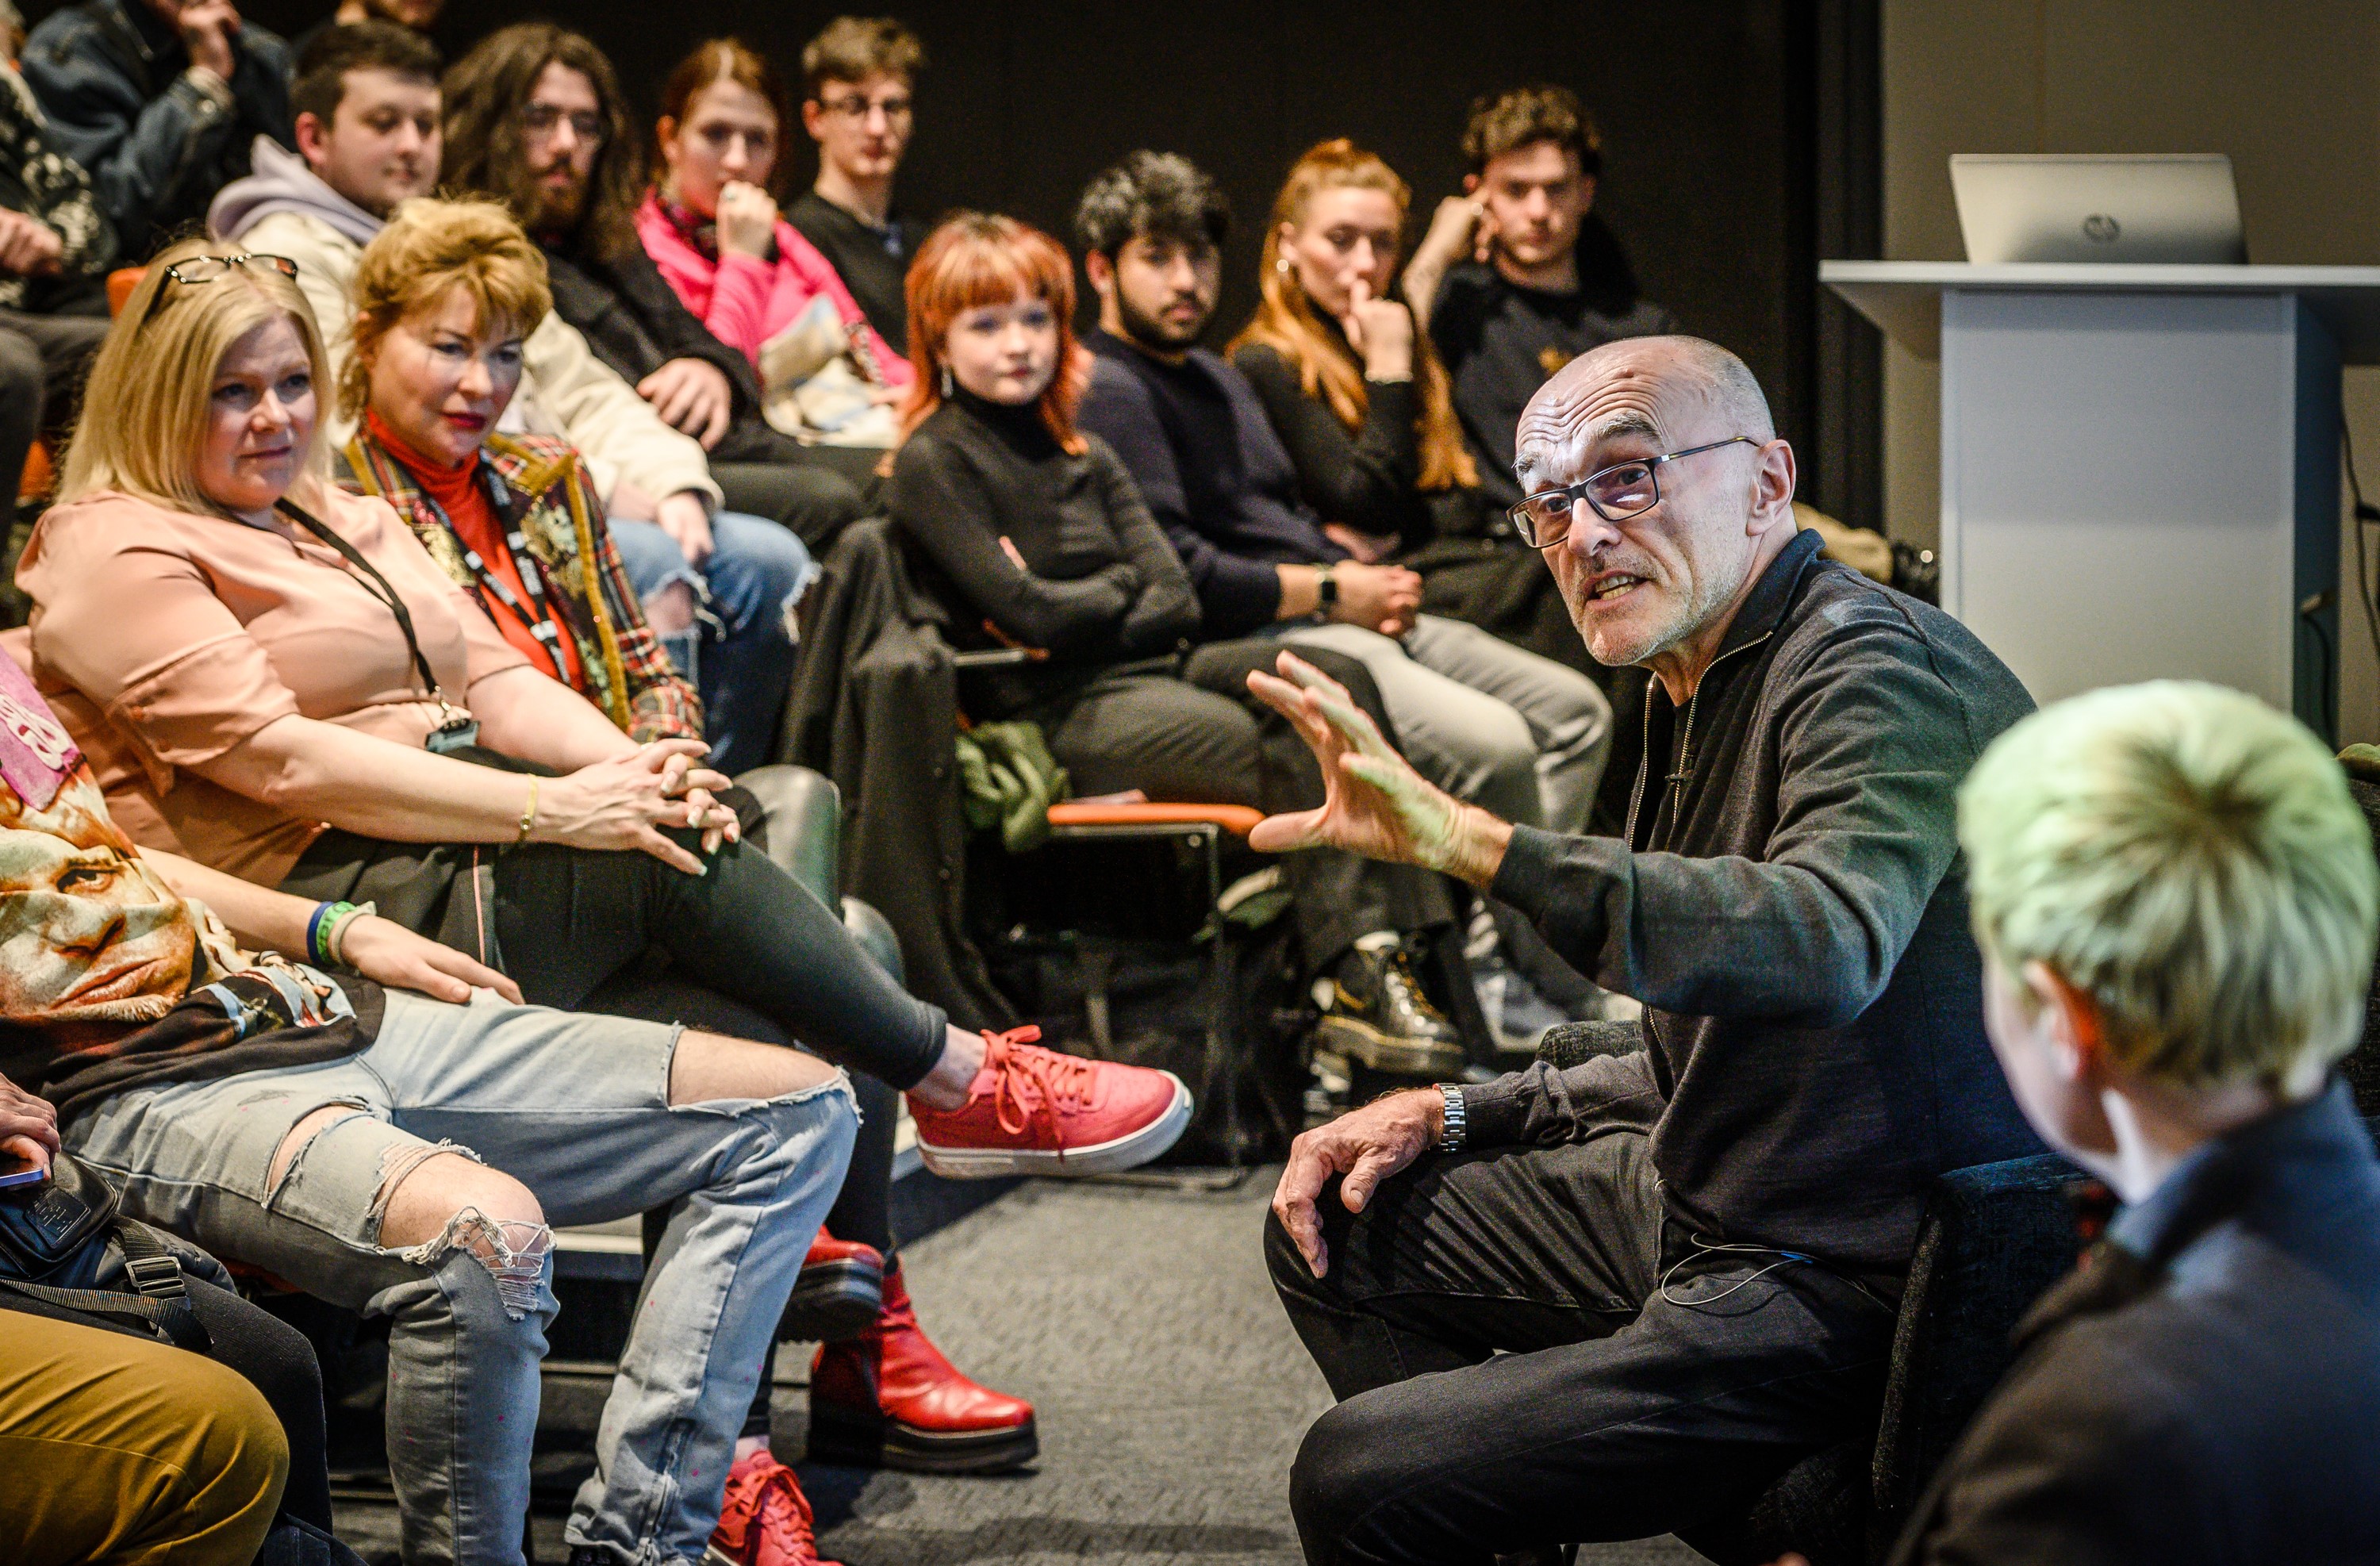 Oscar-winning film director Danny Boyle delivered an inspiring talk and roundtable event with students from the School of Digital Arts (SODA)